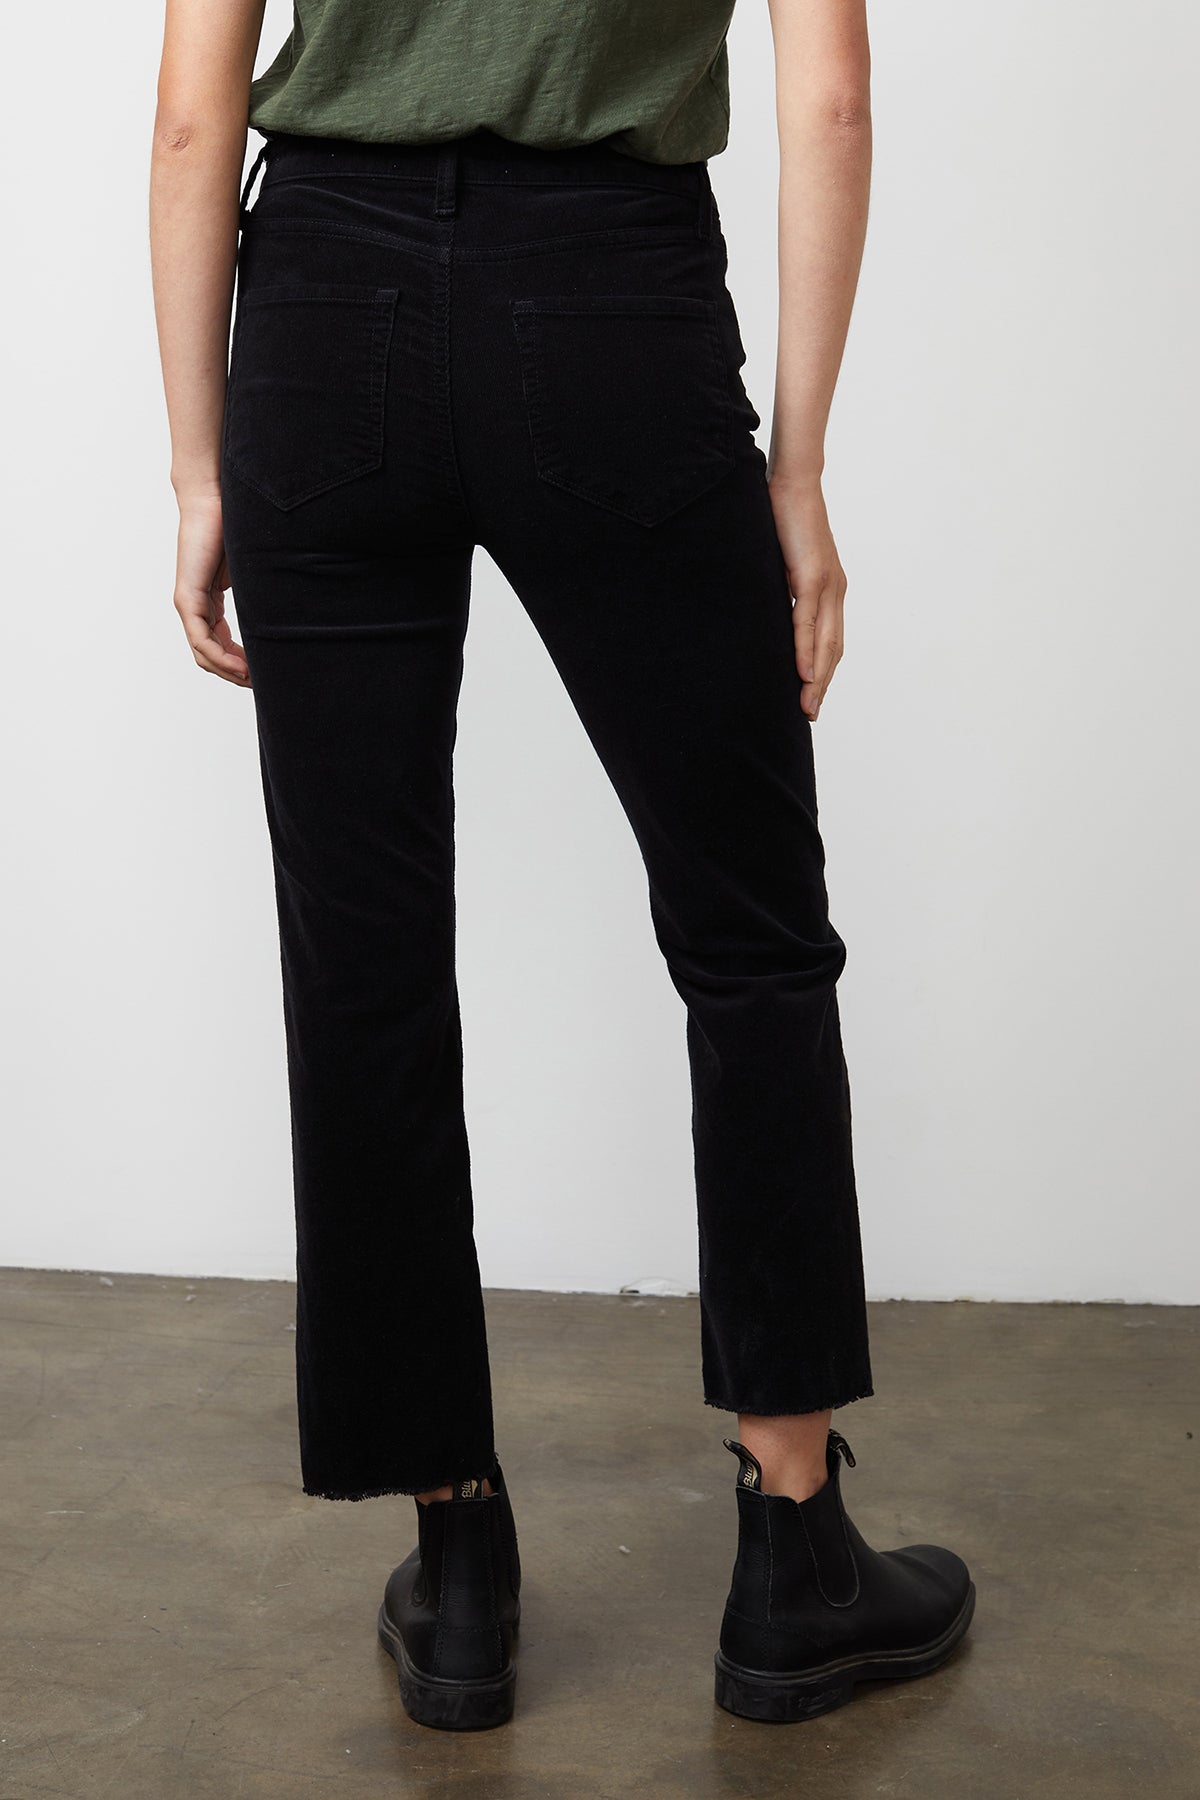   The back view of a person wearing Velvet by Graham & Spencer's CANDACE CORDUROY HIGH RISE CROP JEANS in a fall-inspired color scheme, with cropped cuffs. 